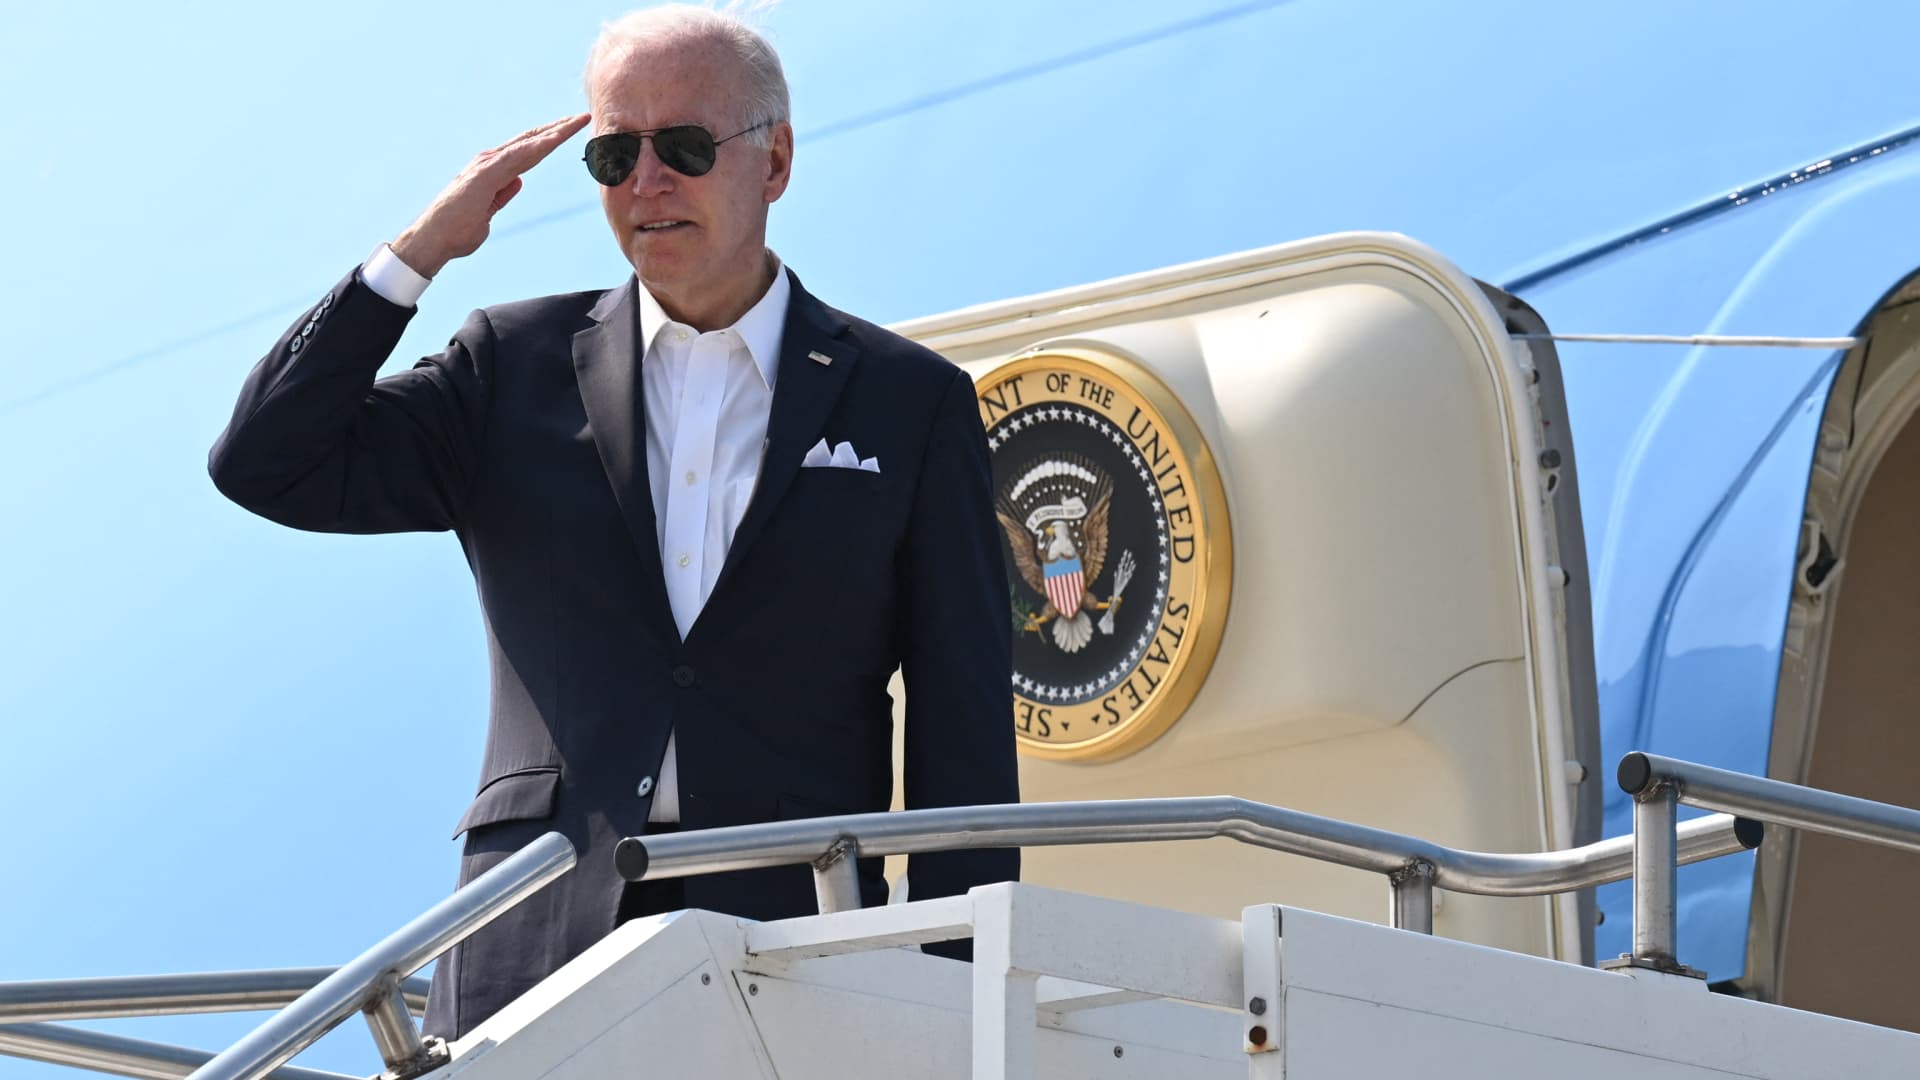 Borrowers on edge as Biden weighs action on student loan forgiveness